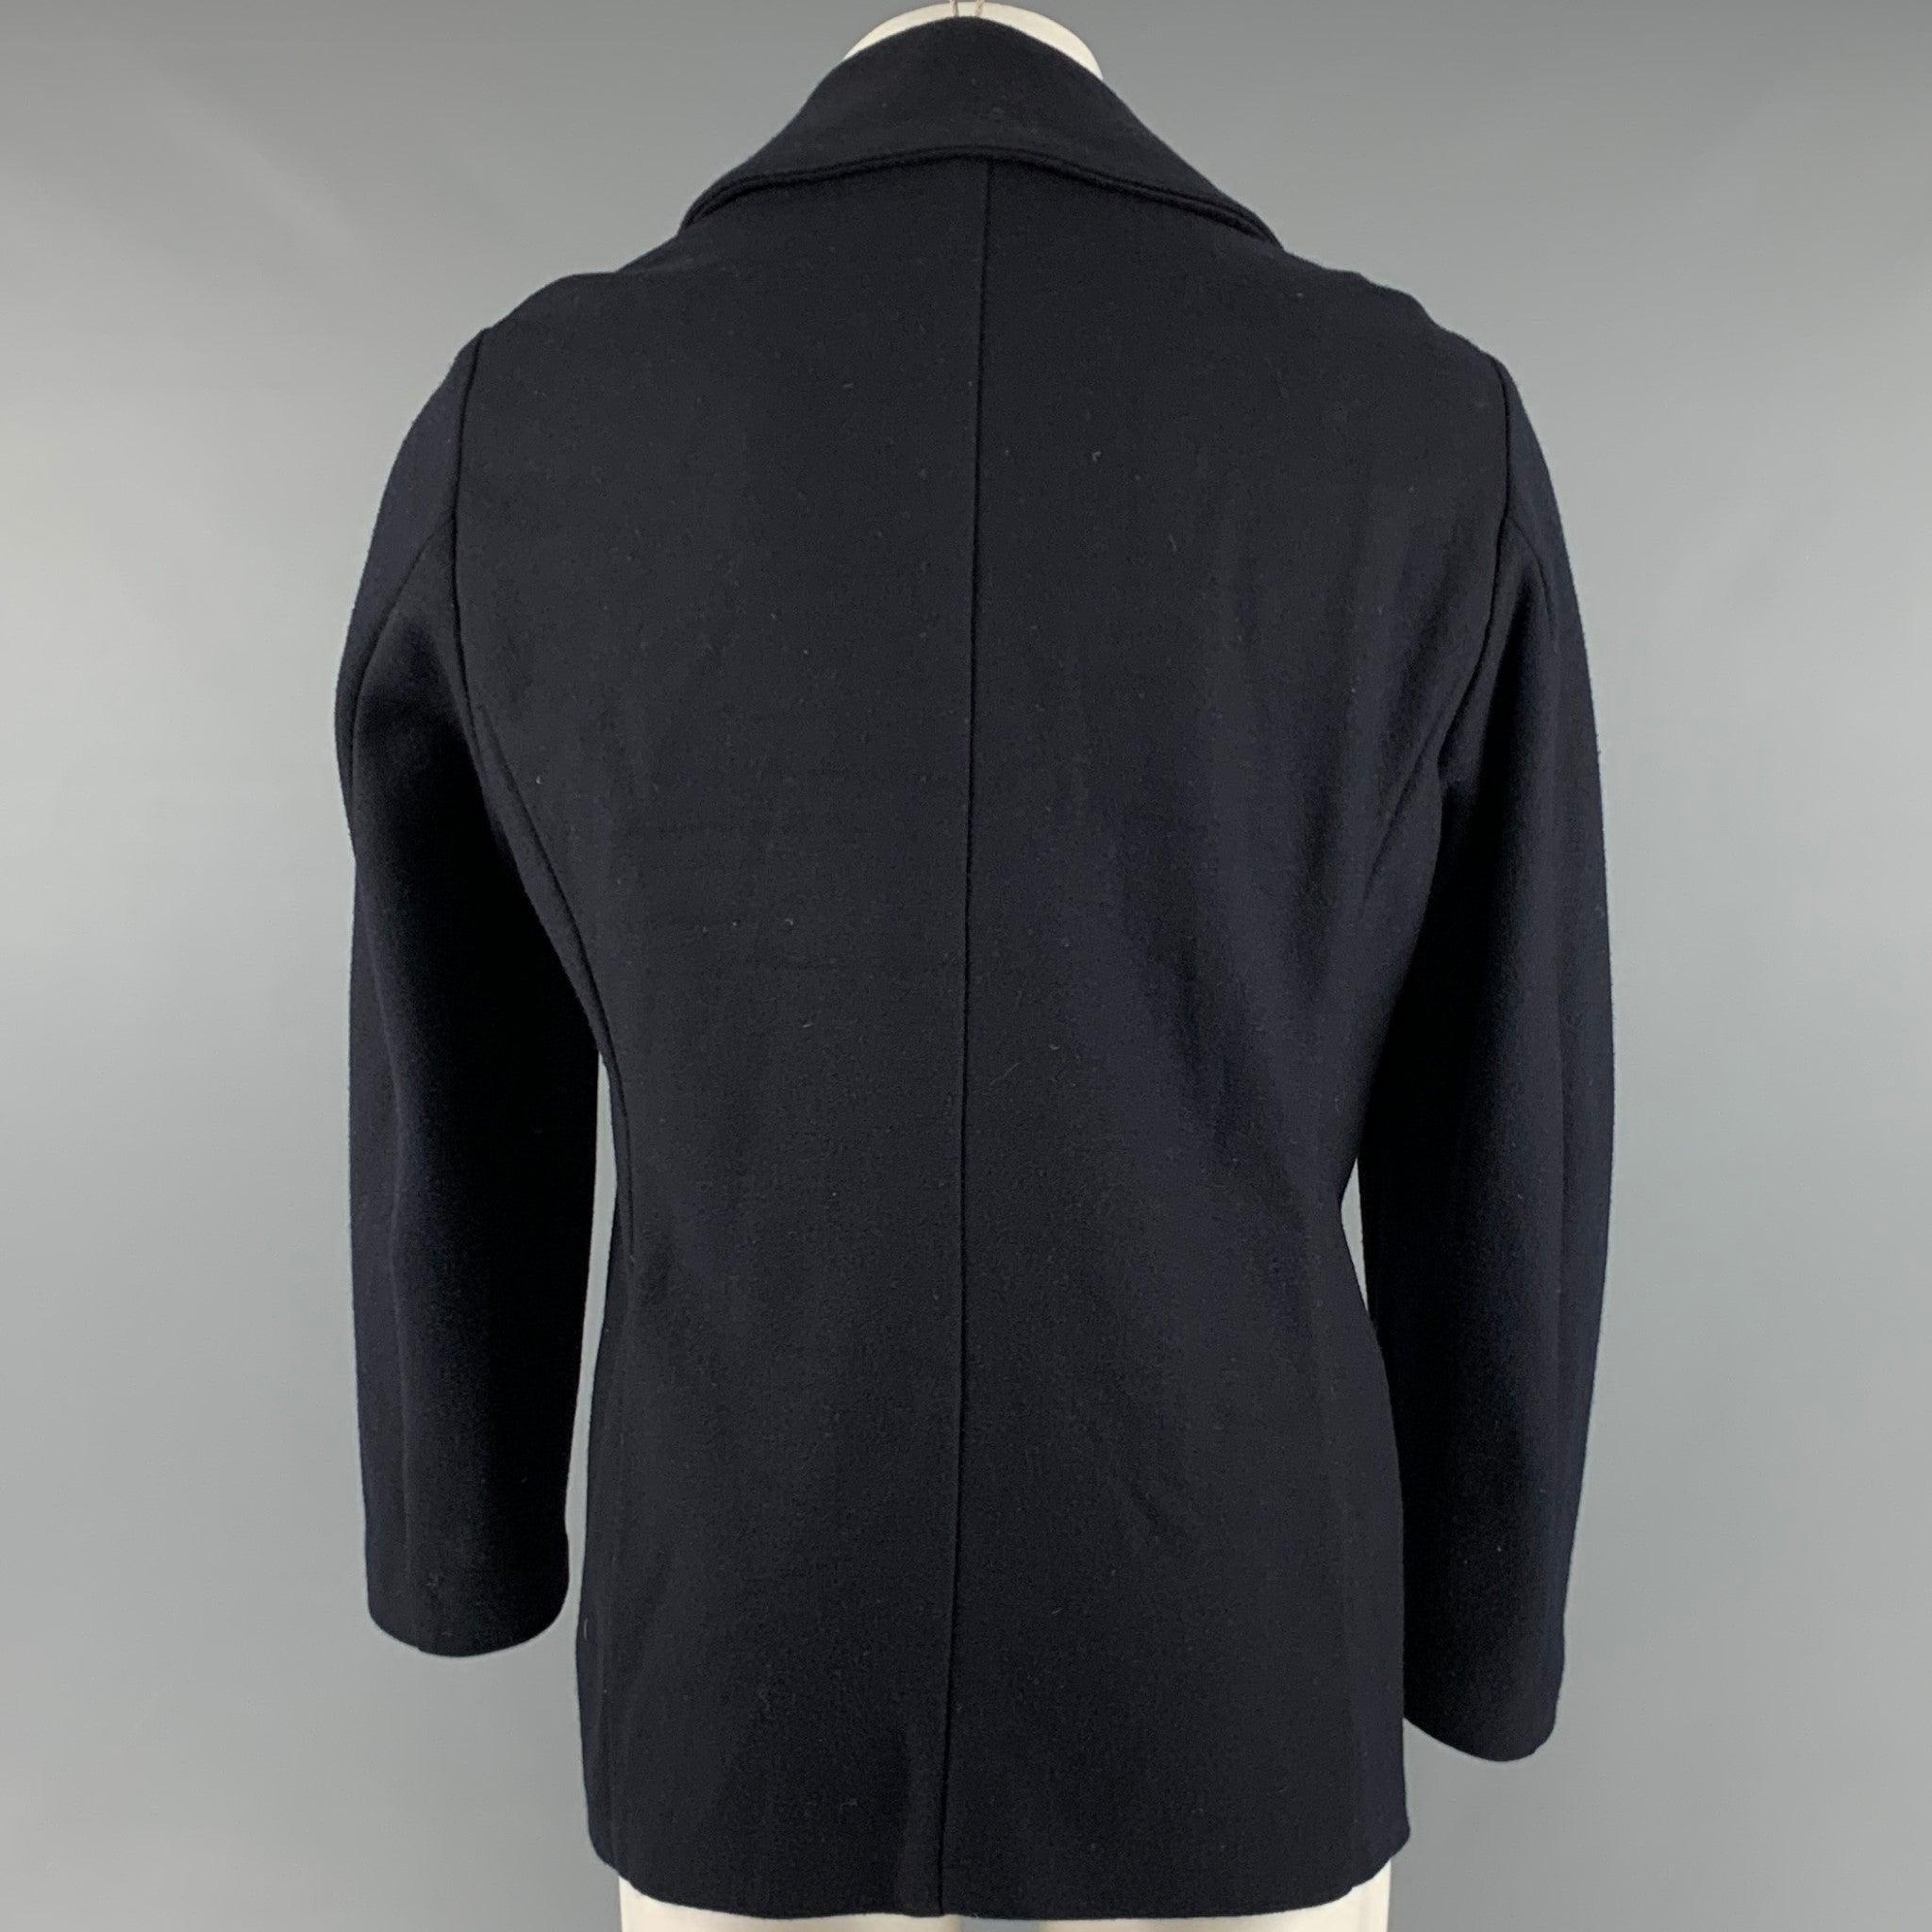 JIL SANDER Size M Navy Wool Peacoat In Excellent Condition For Sale In San Francisco, CA